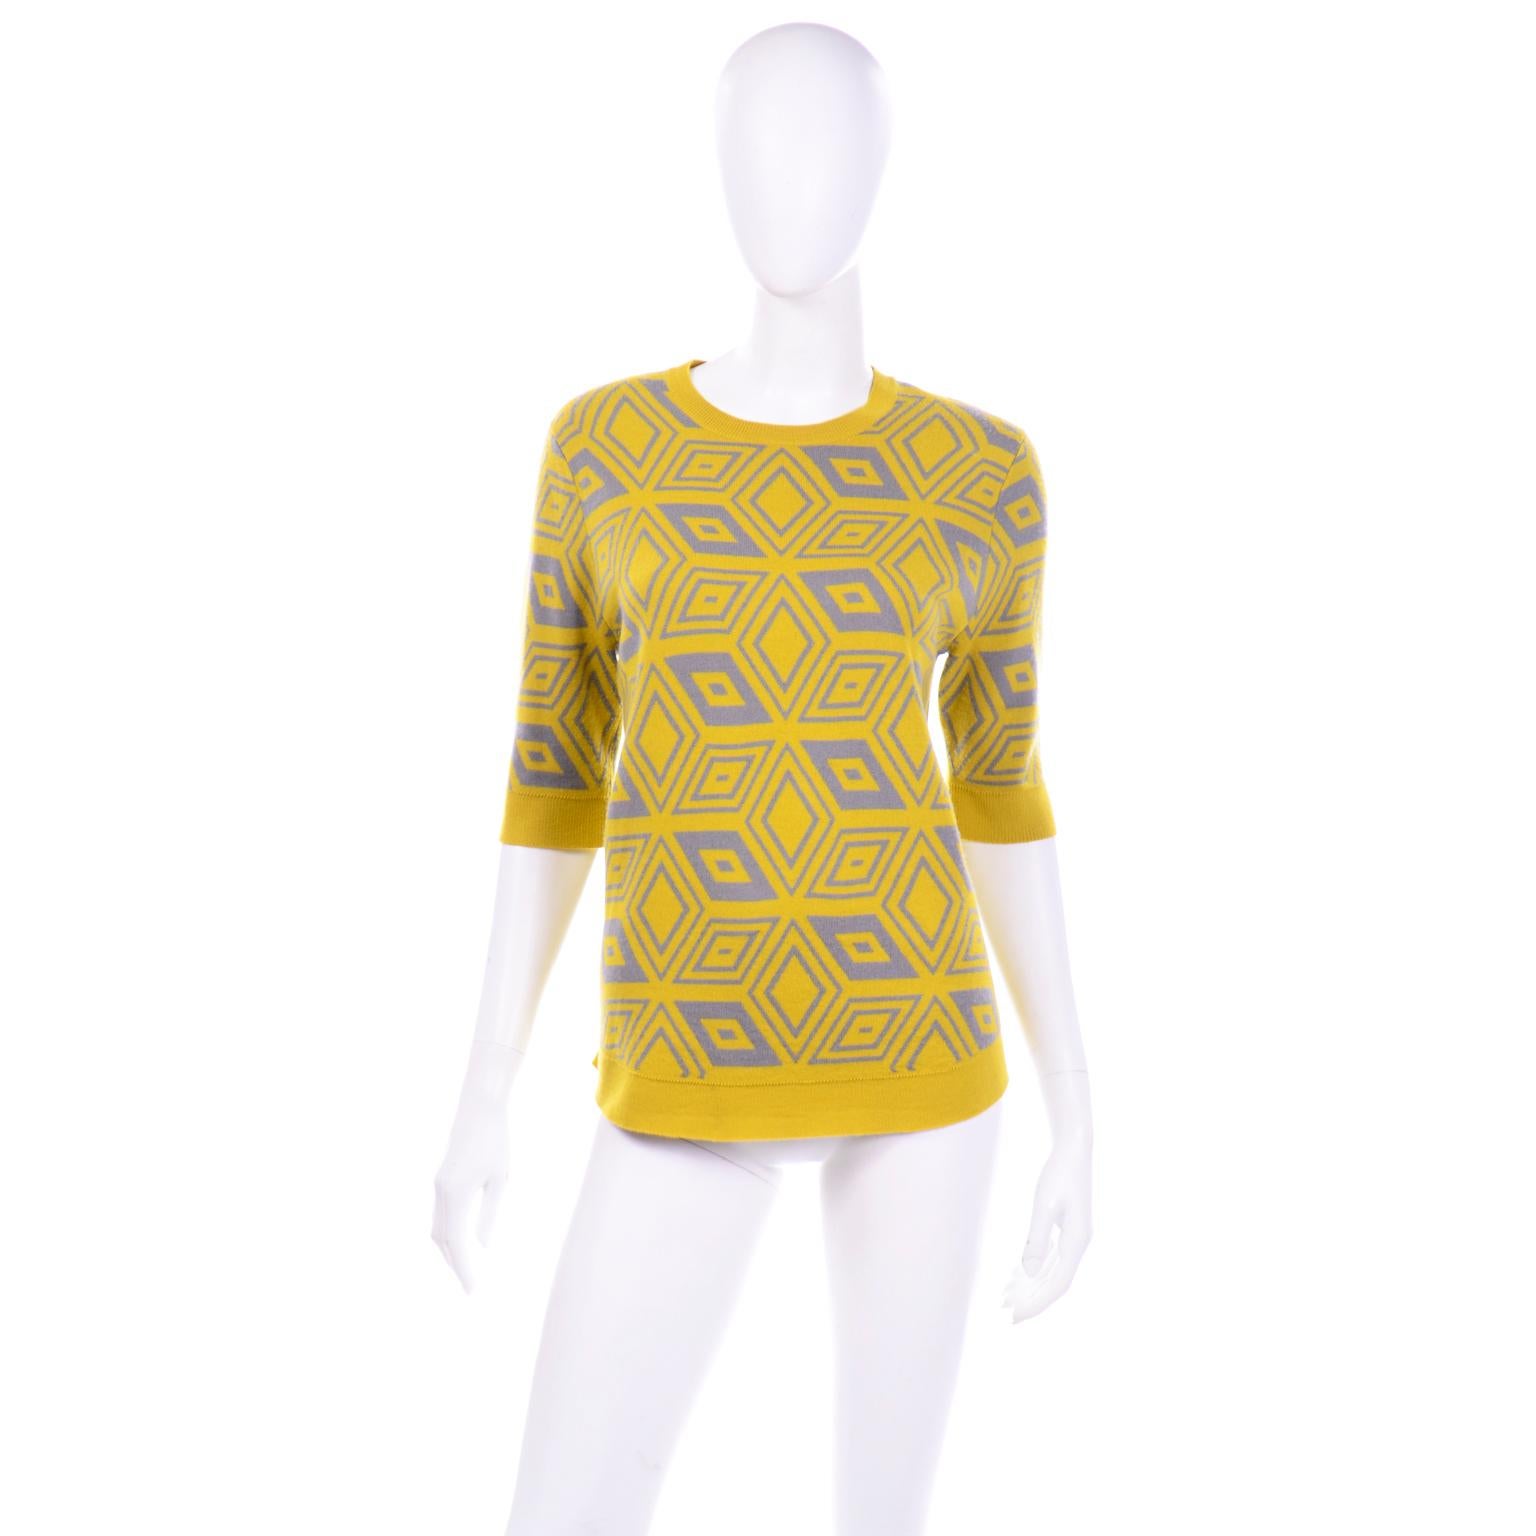 This is a  really fun Dries Van Noten yellow lime green and grey abstract printed wool sweater top with elbow length sleeves and a rounded collar. The abstract print is almost like a kaleidoscope pattern and the color combination adds a lot of